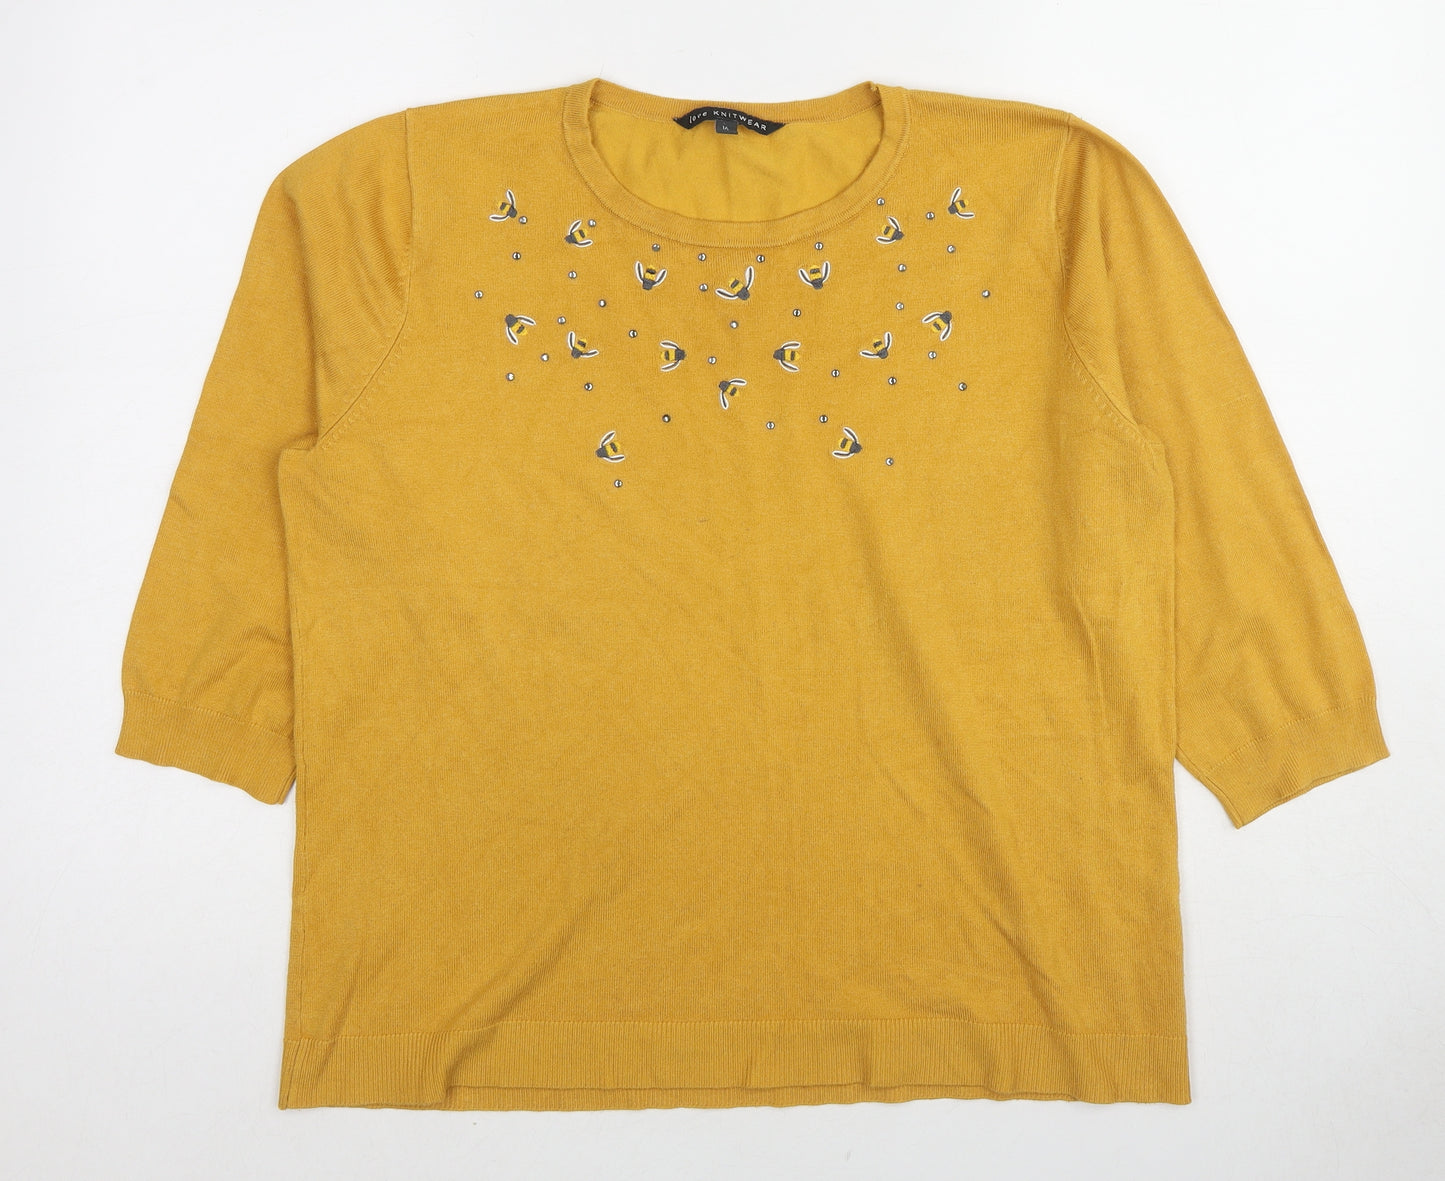 Bonmarché Womens Yellow Round Neck Viscose Pullover Jumper Size 16 - Bumble Bee